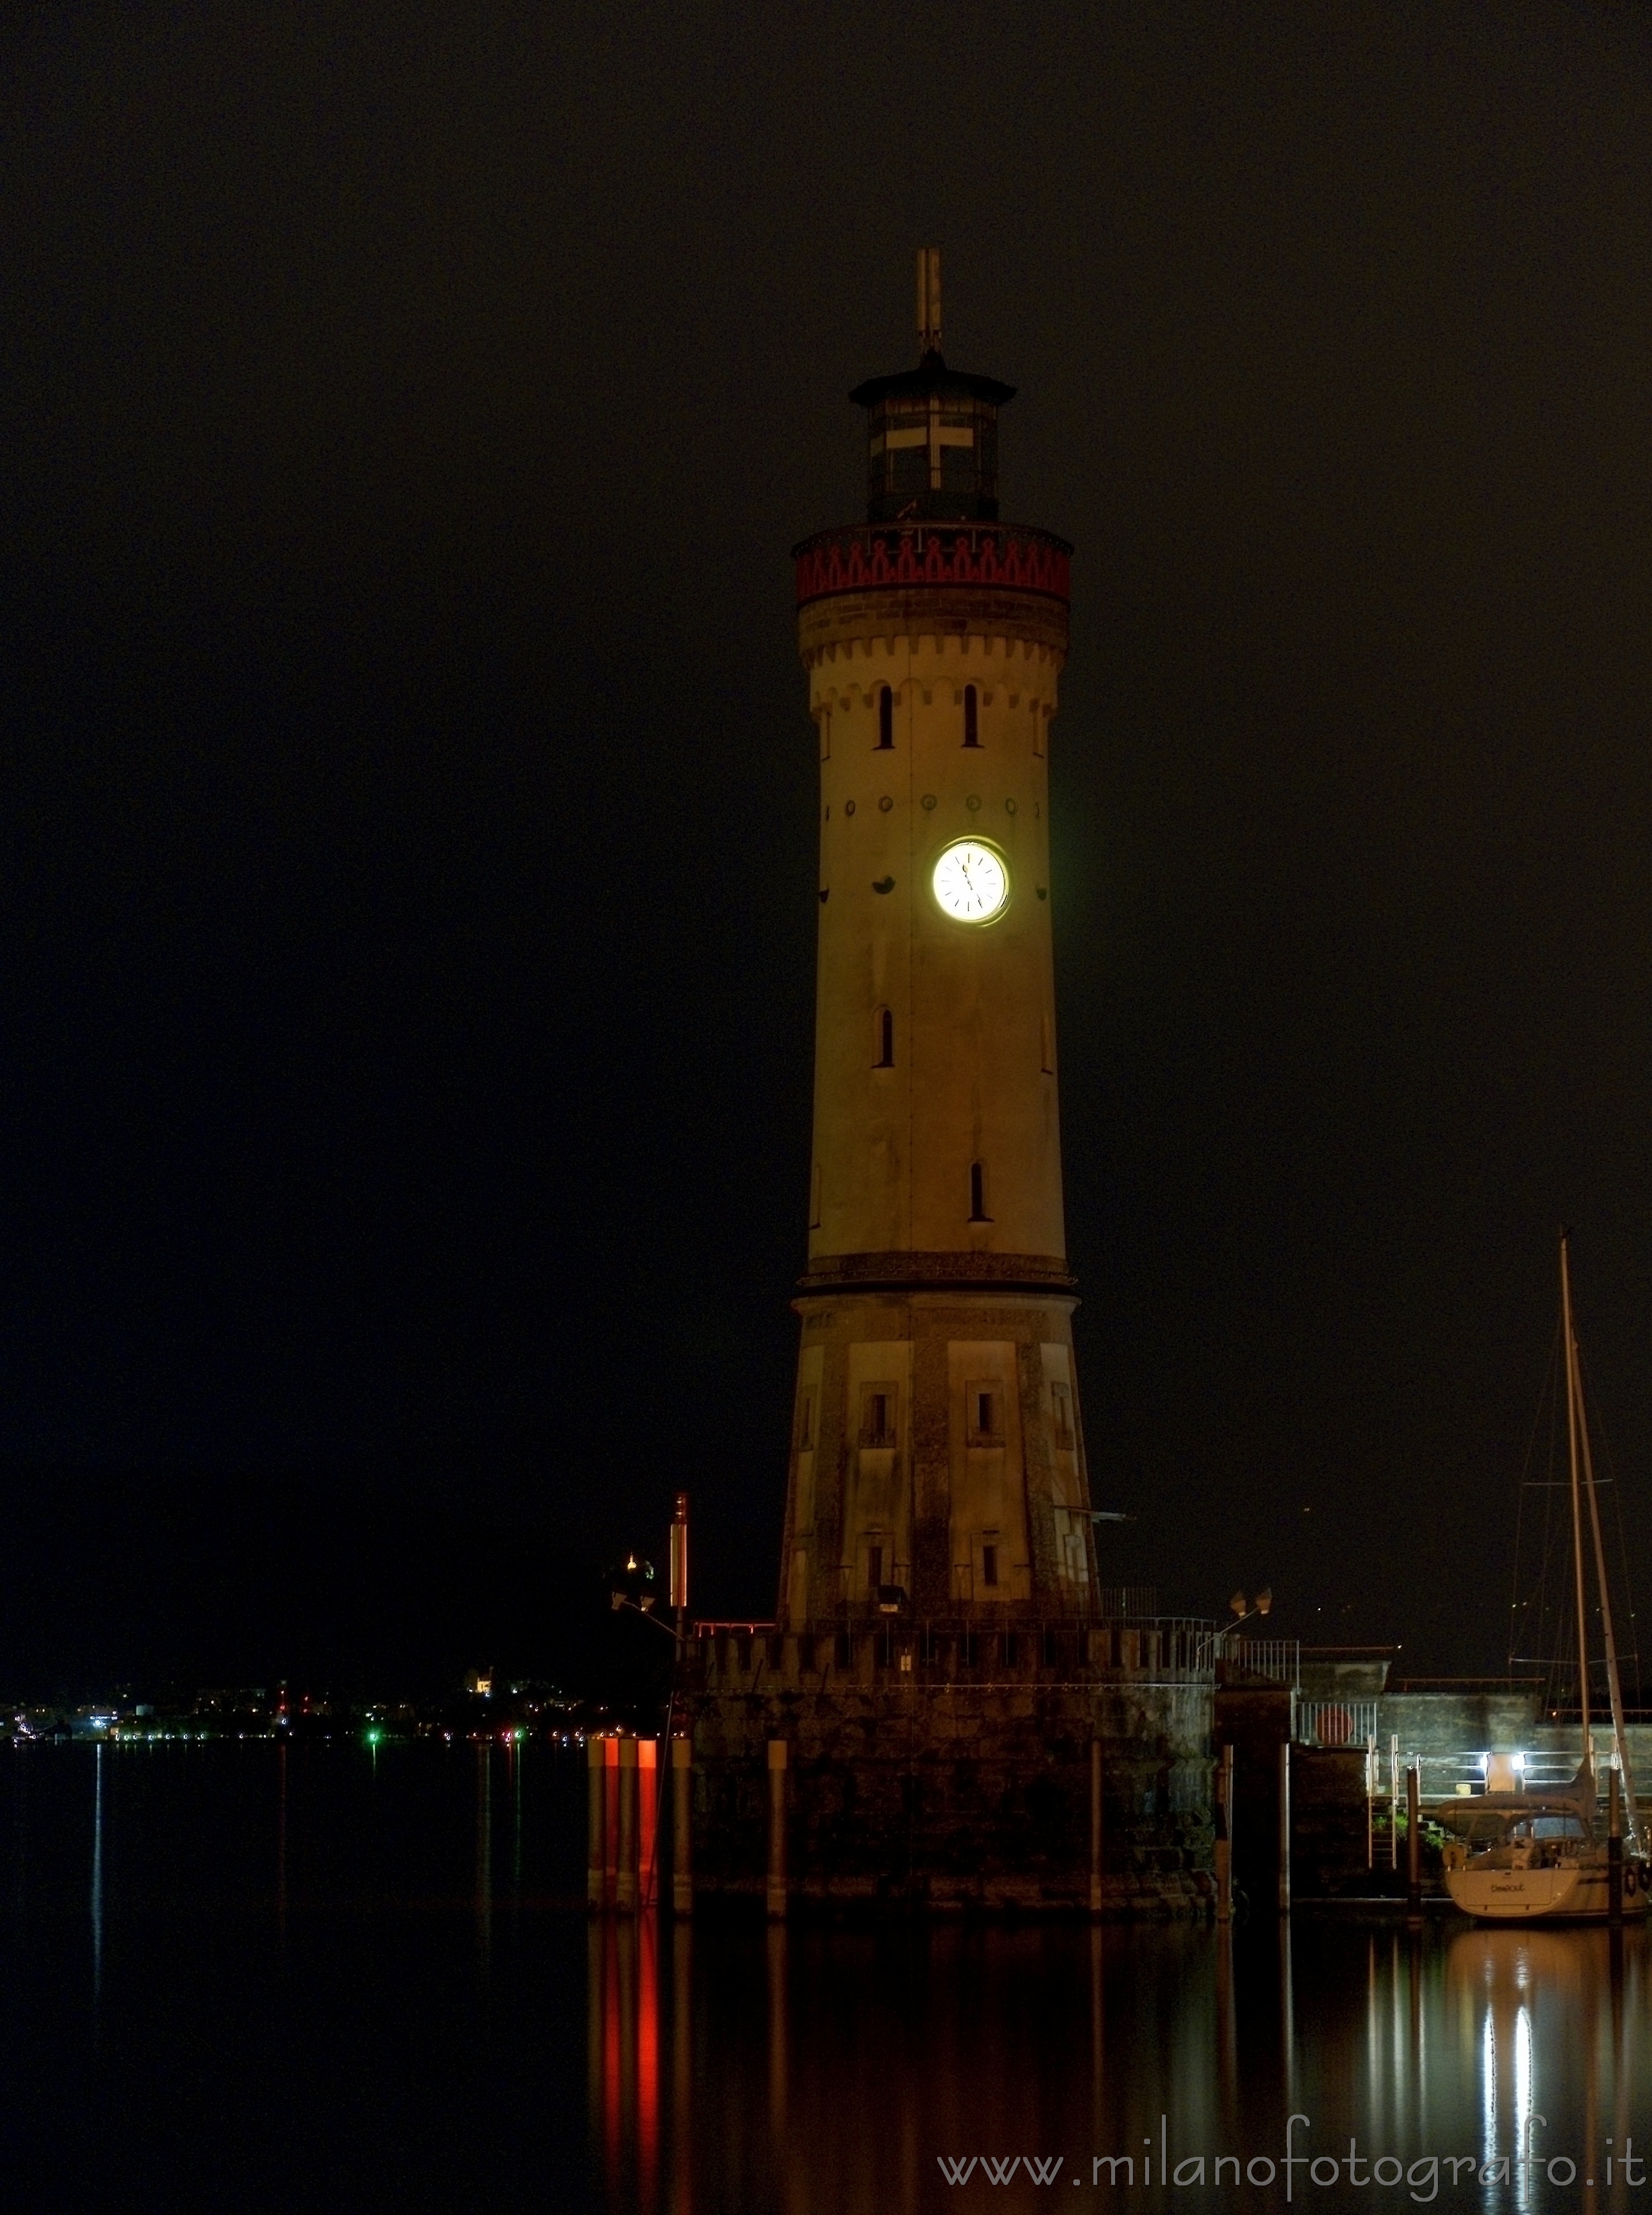 Lindau (Lake Constance, Germany): Lighttower by night - Lindau (Lake Constance, Germany)